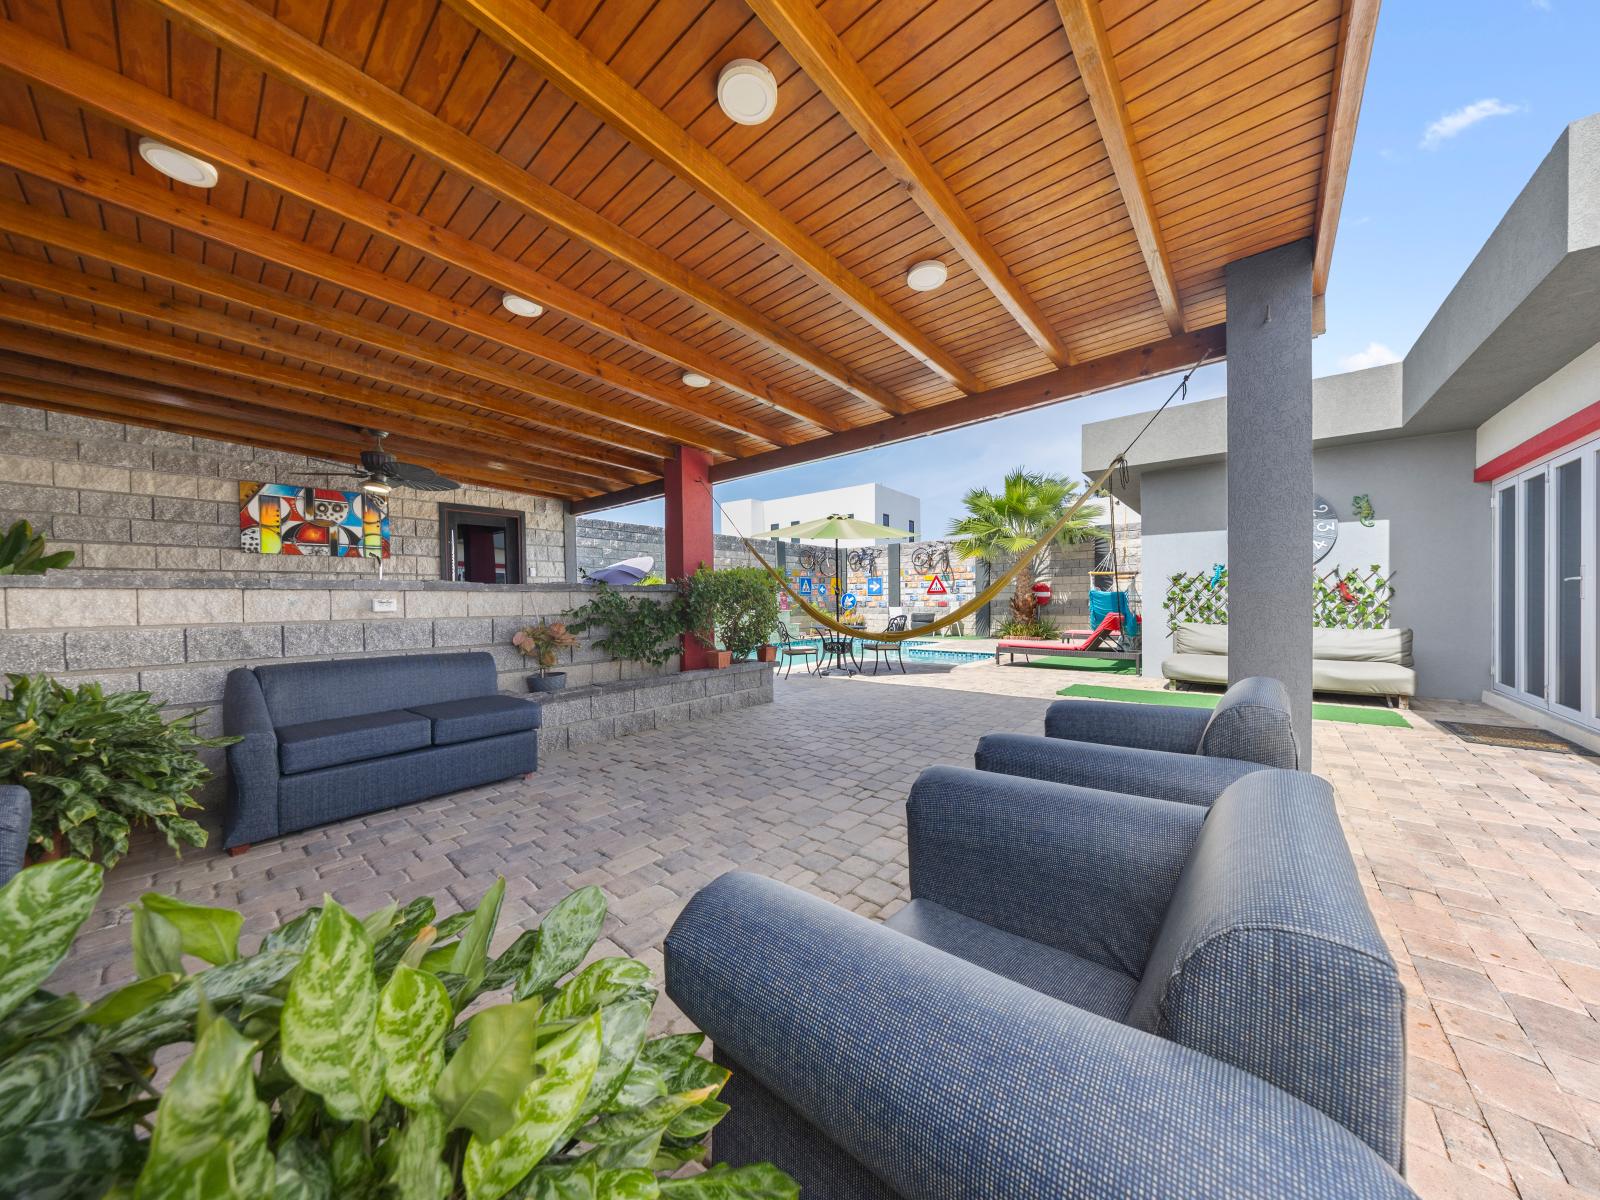 Embrace the beauty of outdoor living in this serene seating area of the home in Aruba - Savor the peaceful atmosphere of this outdoor seating spot, where relaxation takes center stage - Discover your own slice of paradise with plush seating & views